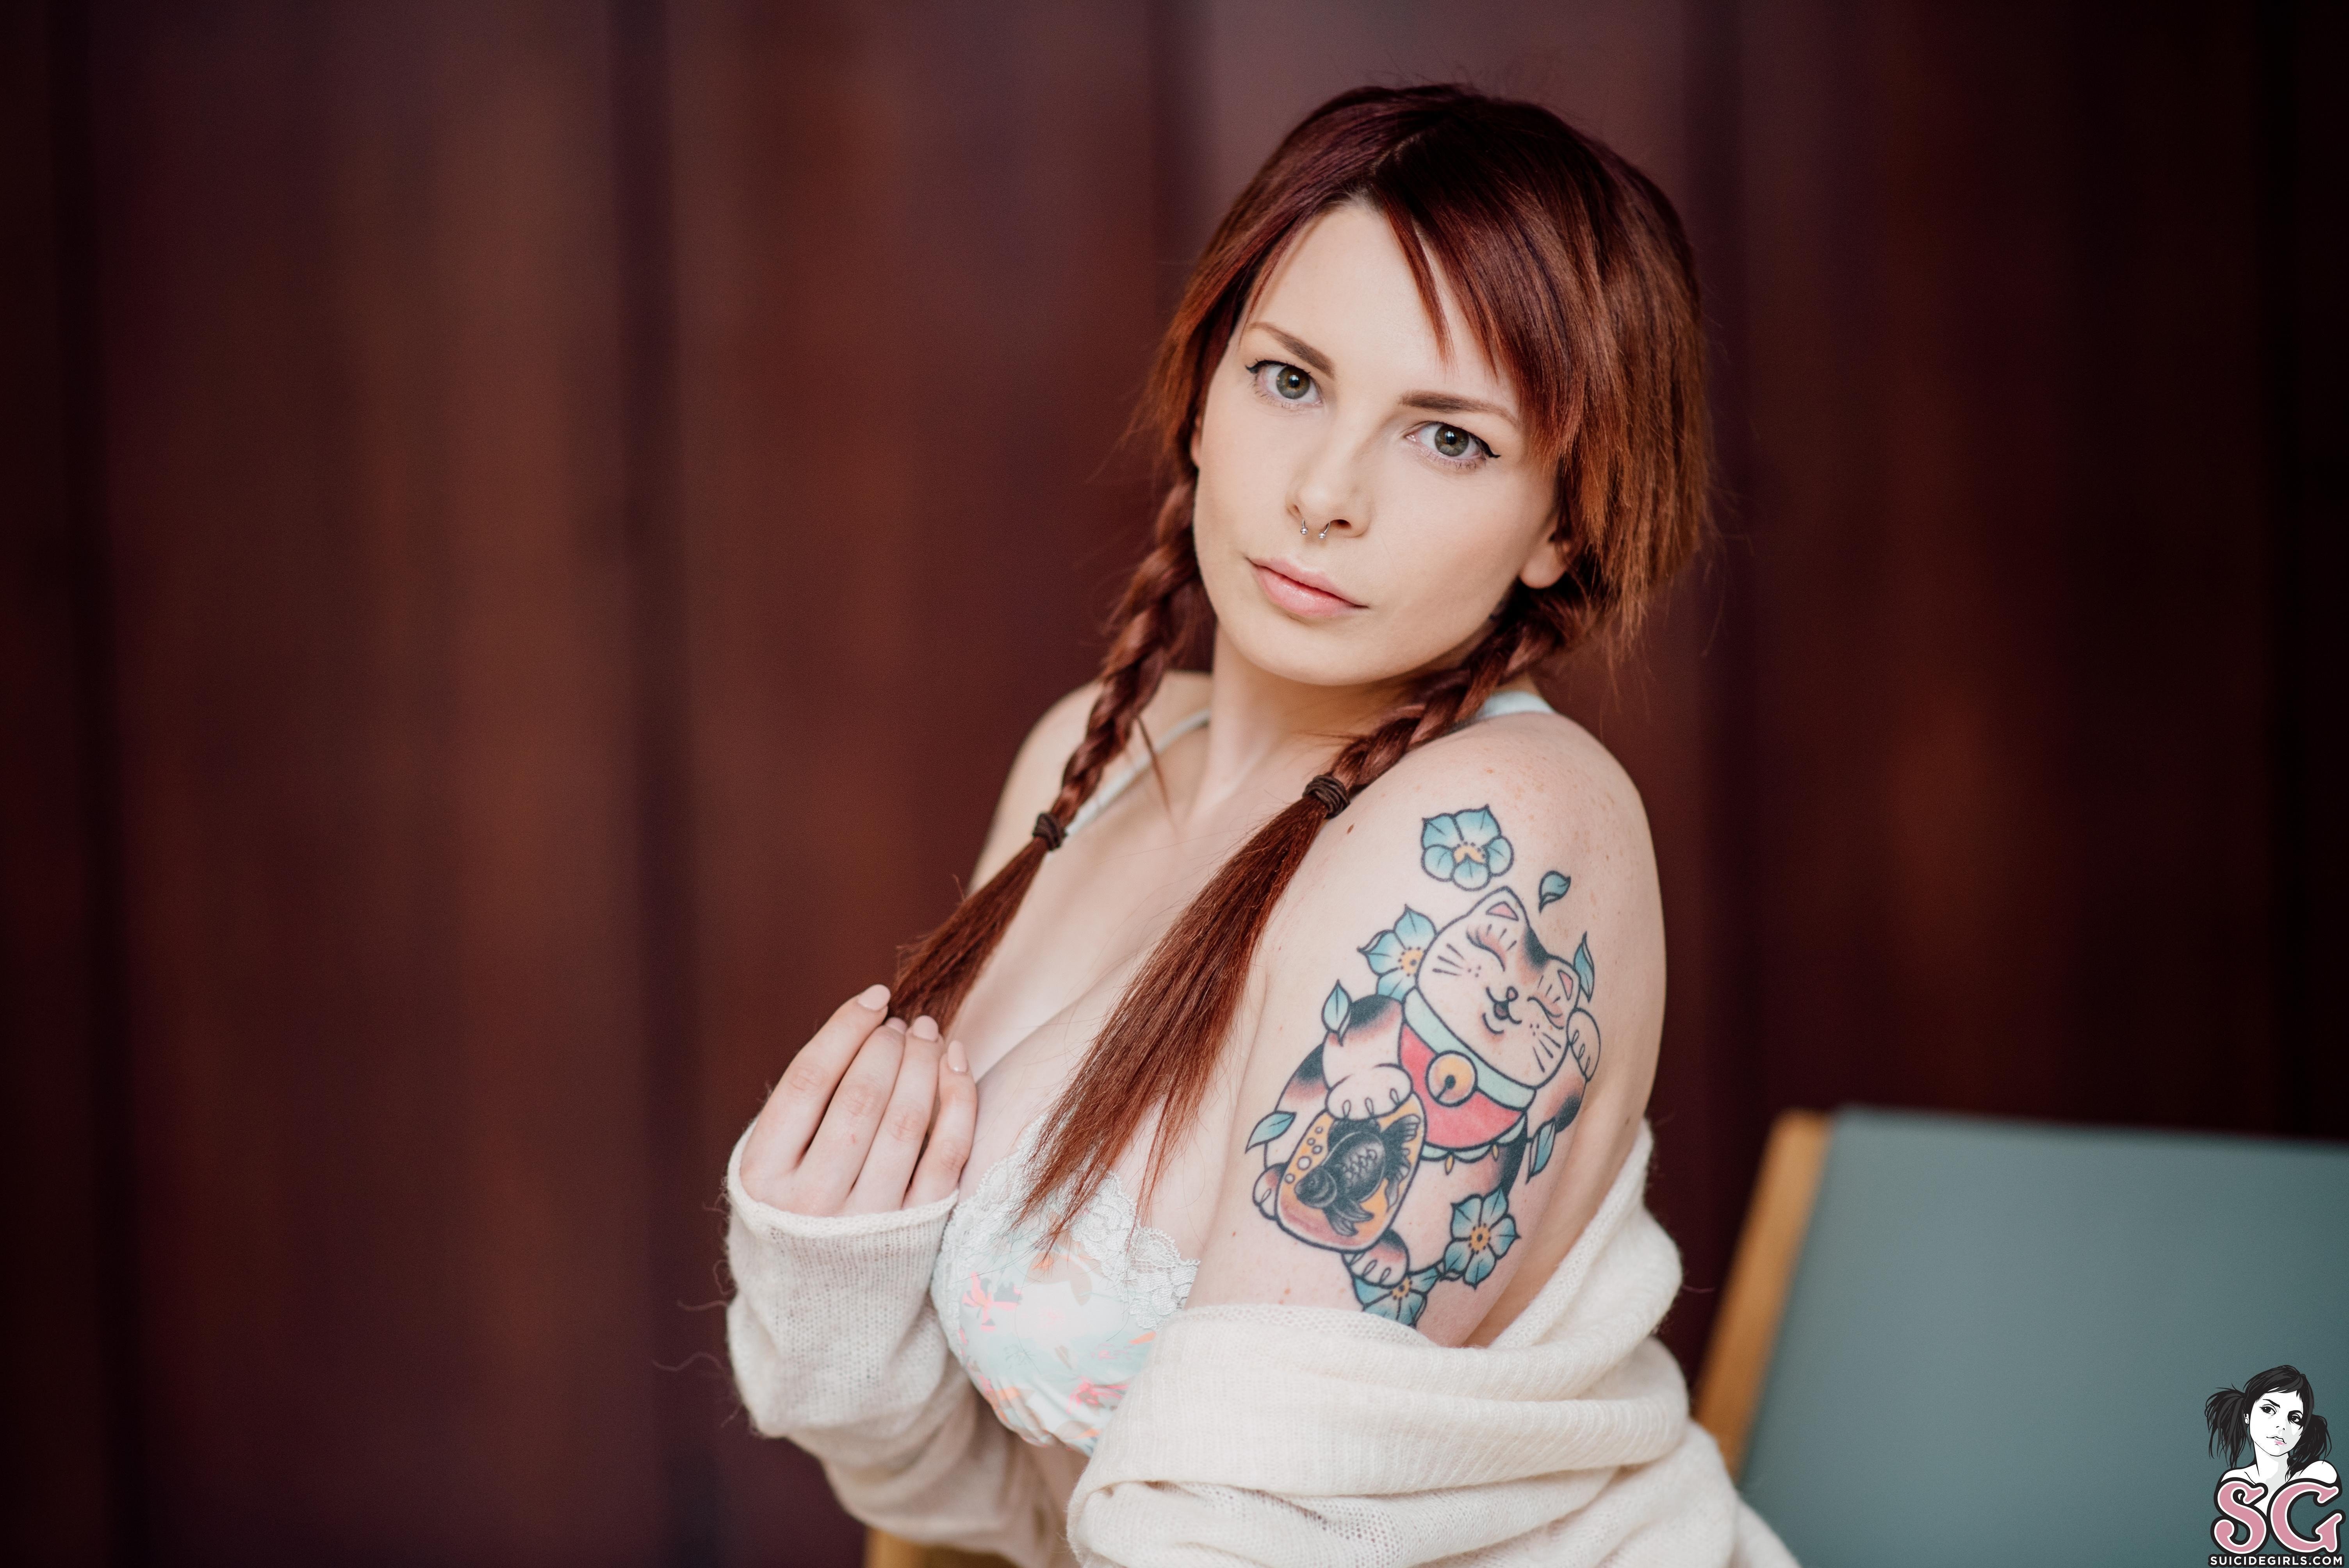 Beautiful Suicide Girl Peggysue How Soon Is Now 06 Big curvy Assets High re...